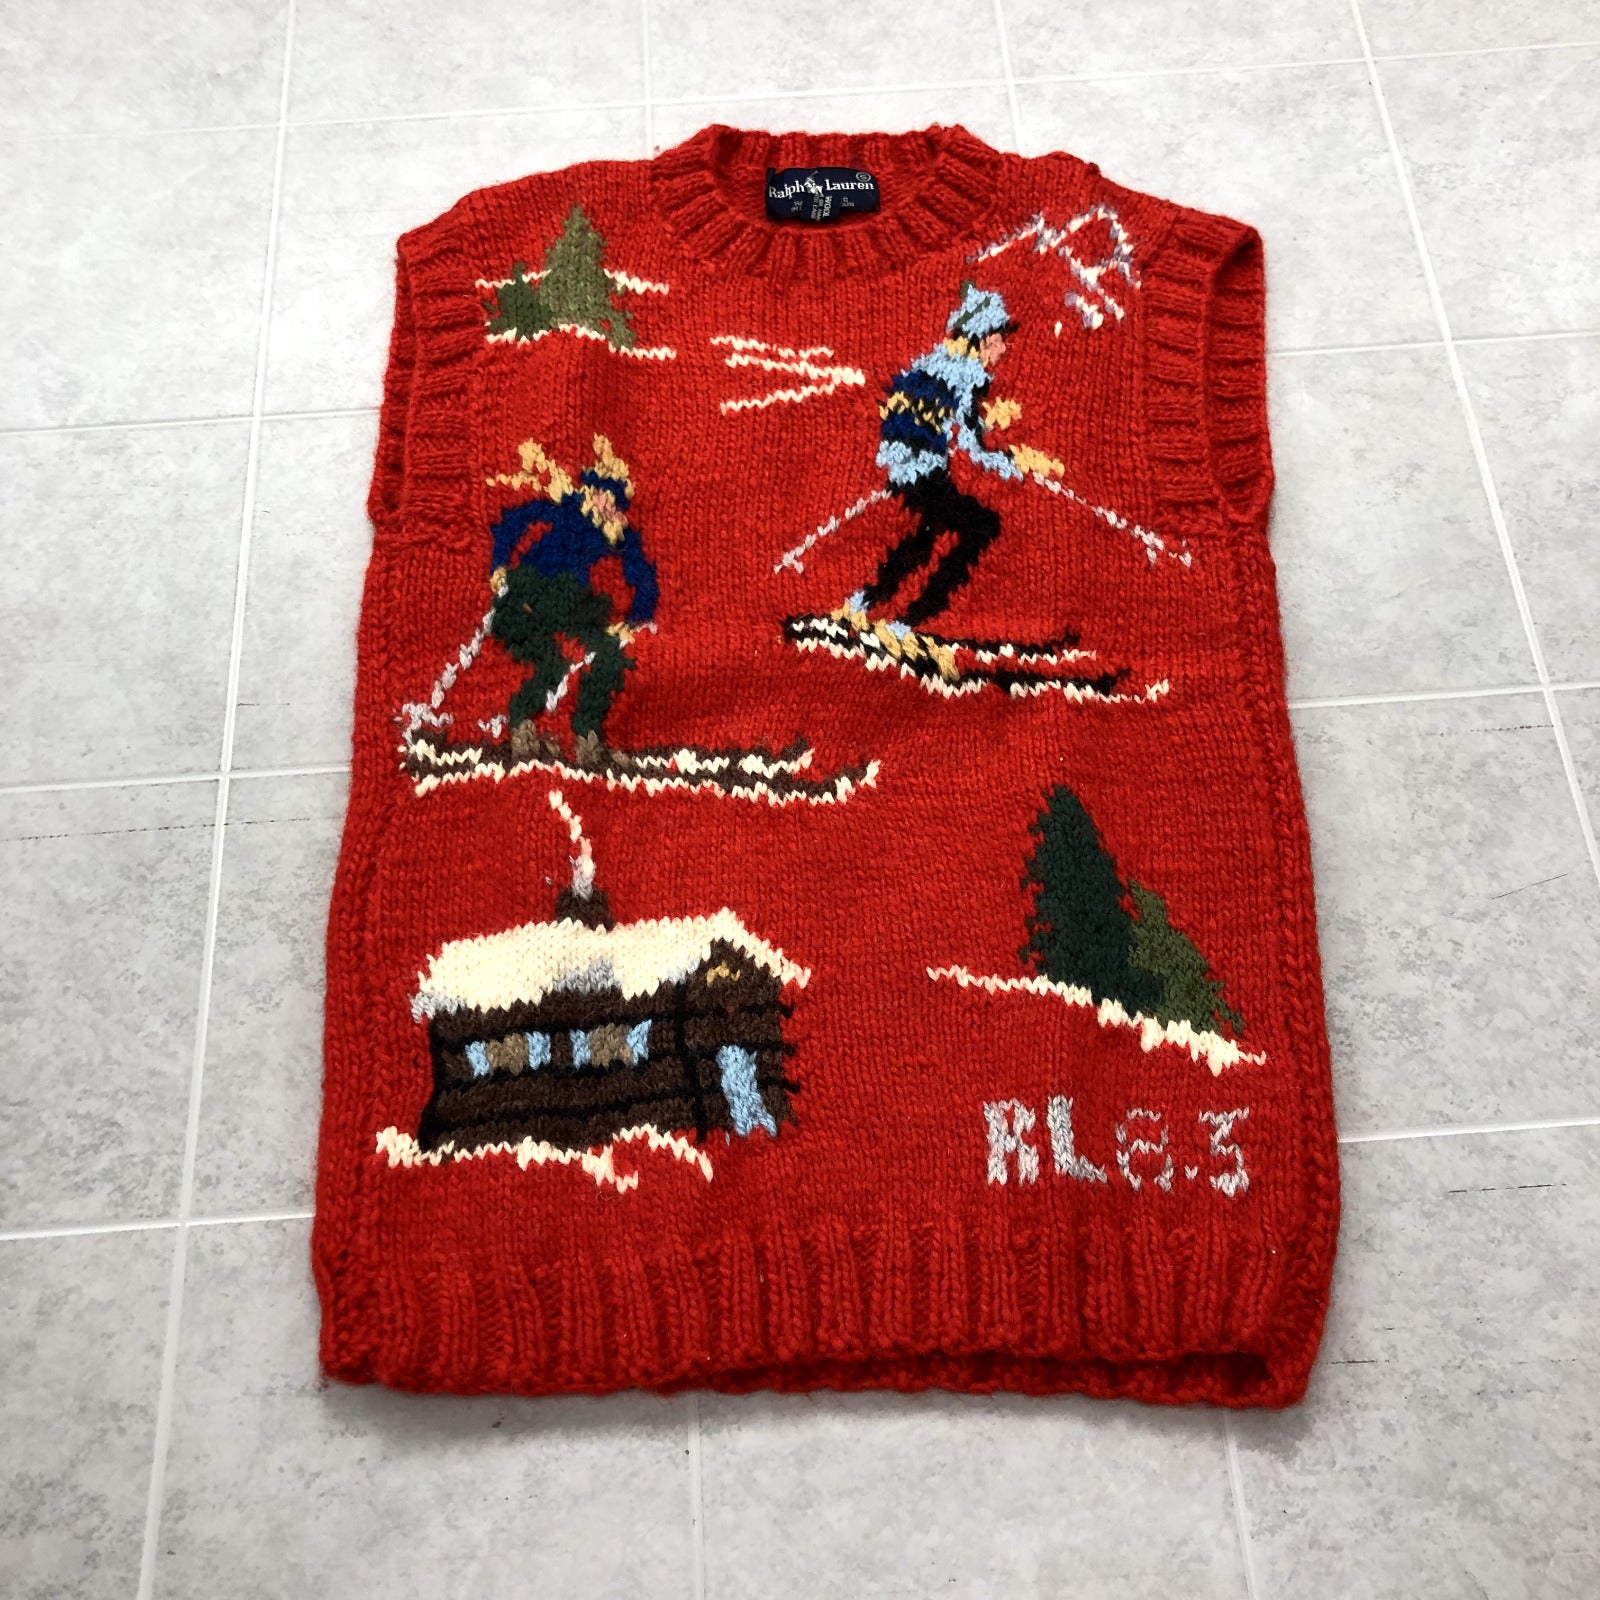 Vintage Ralph Lauren Red Sleeveless Knit RL83 Ski Holiday Sweater Adult Size S